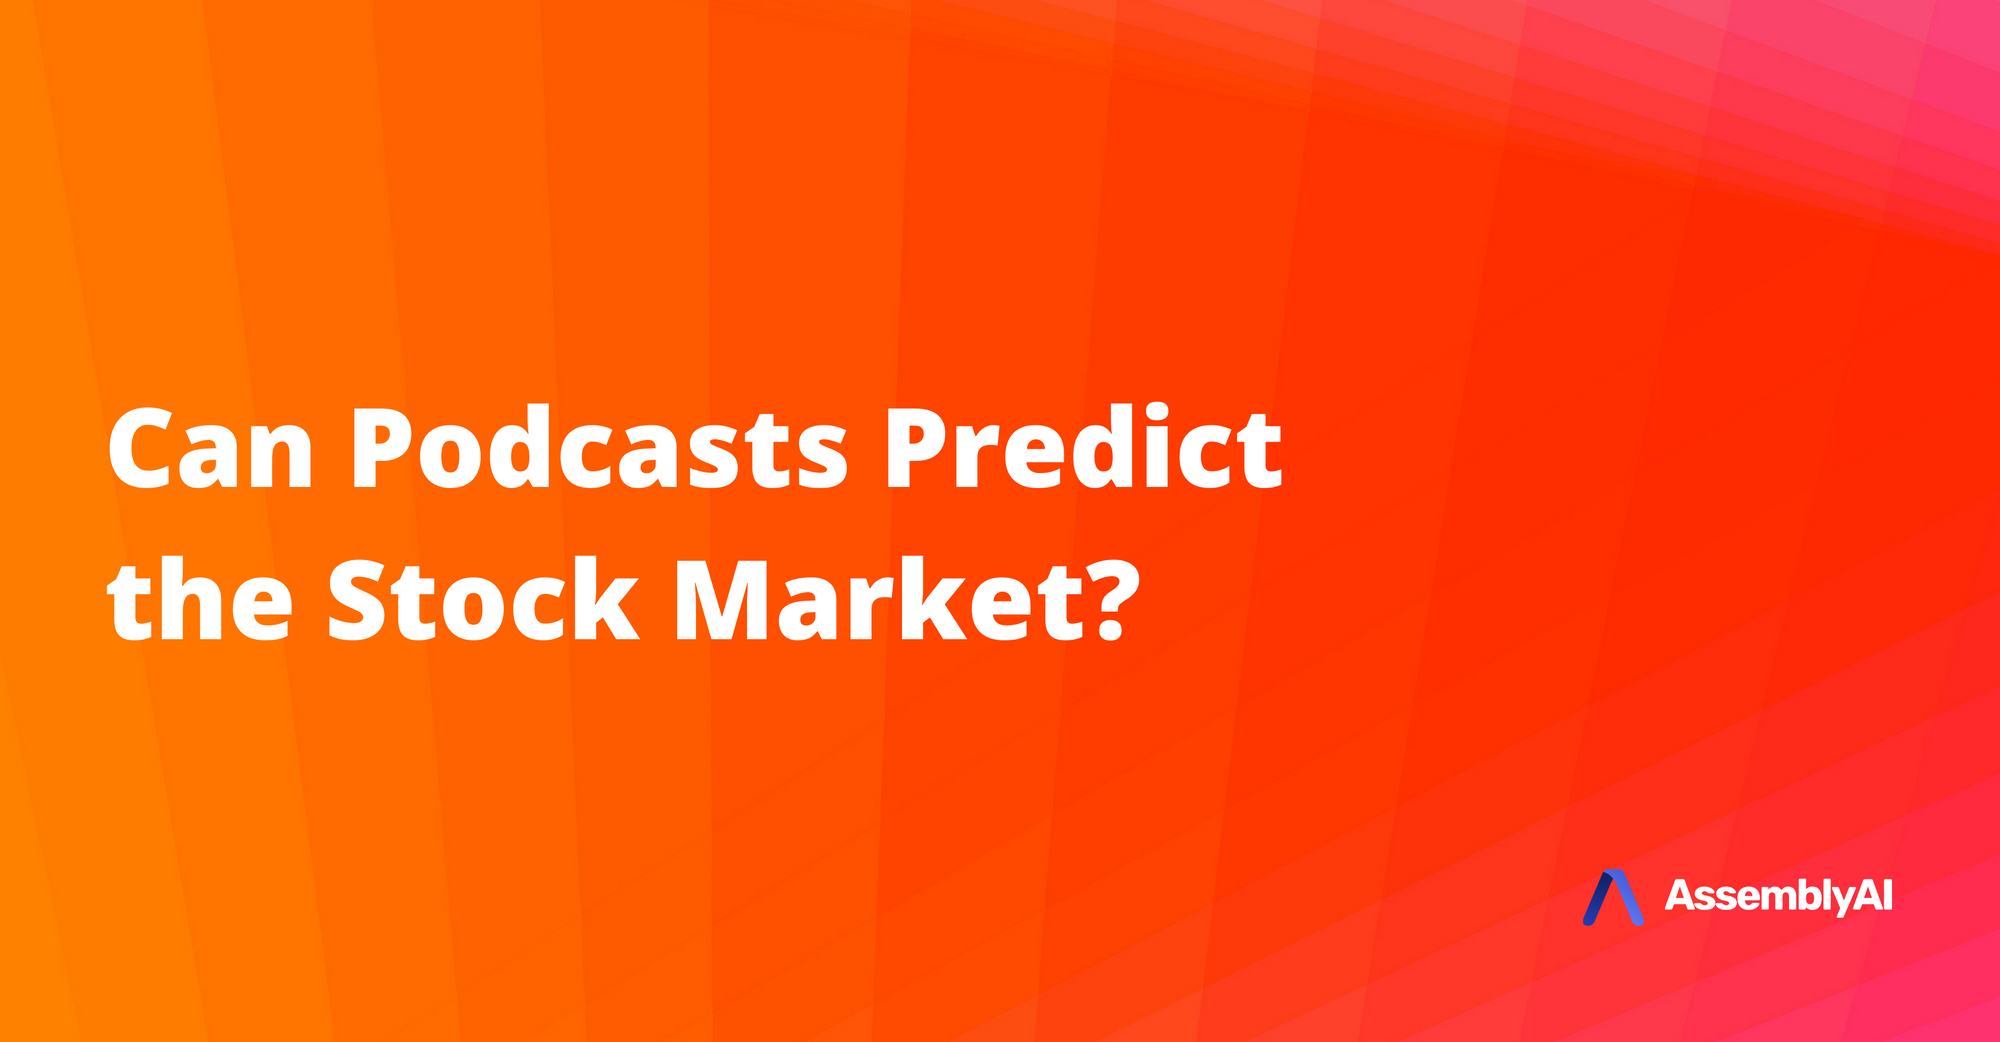 Can Podcasts Predict the Stock Market?